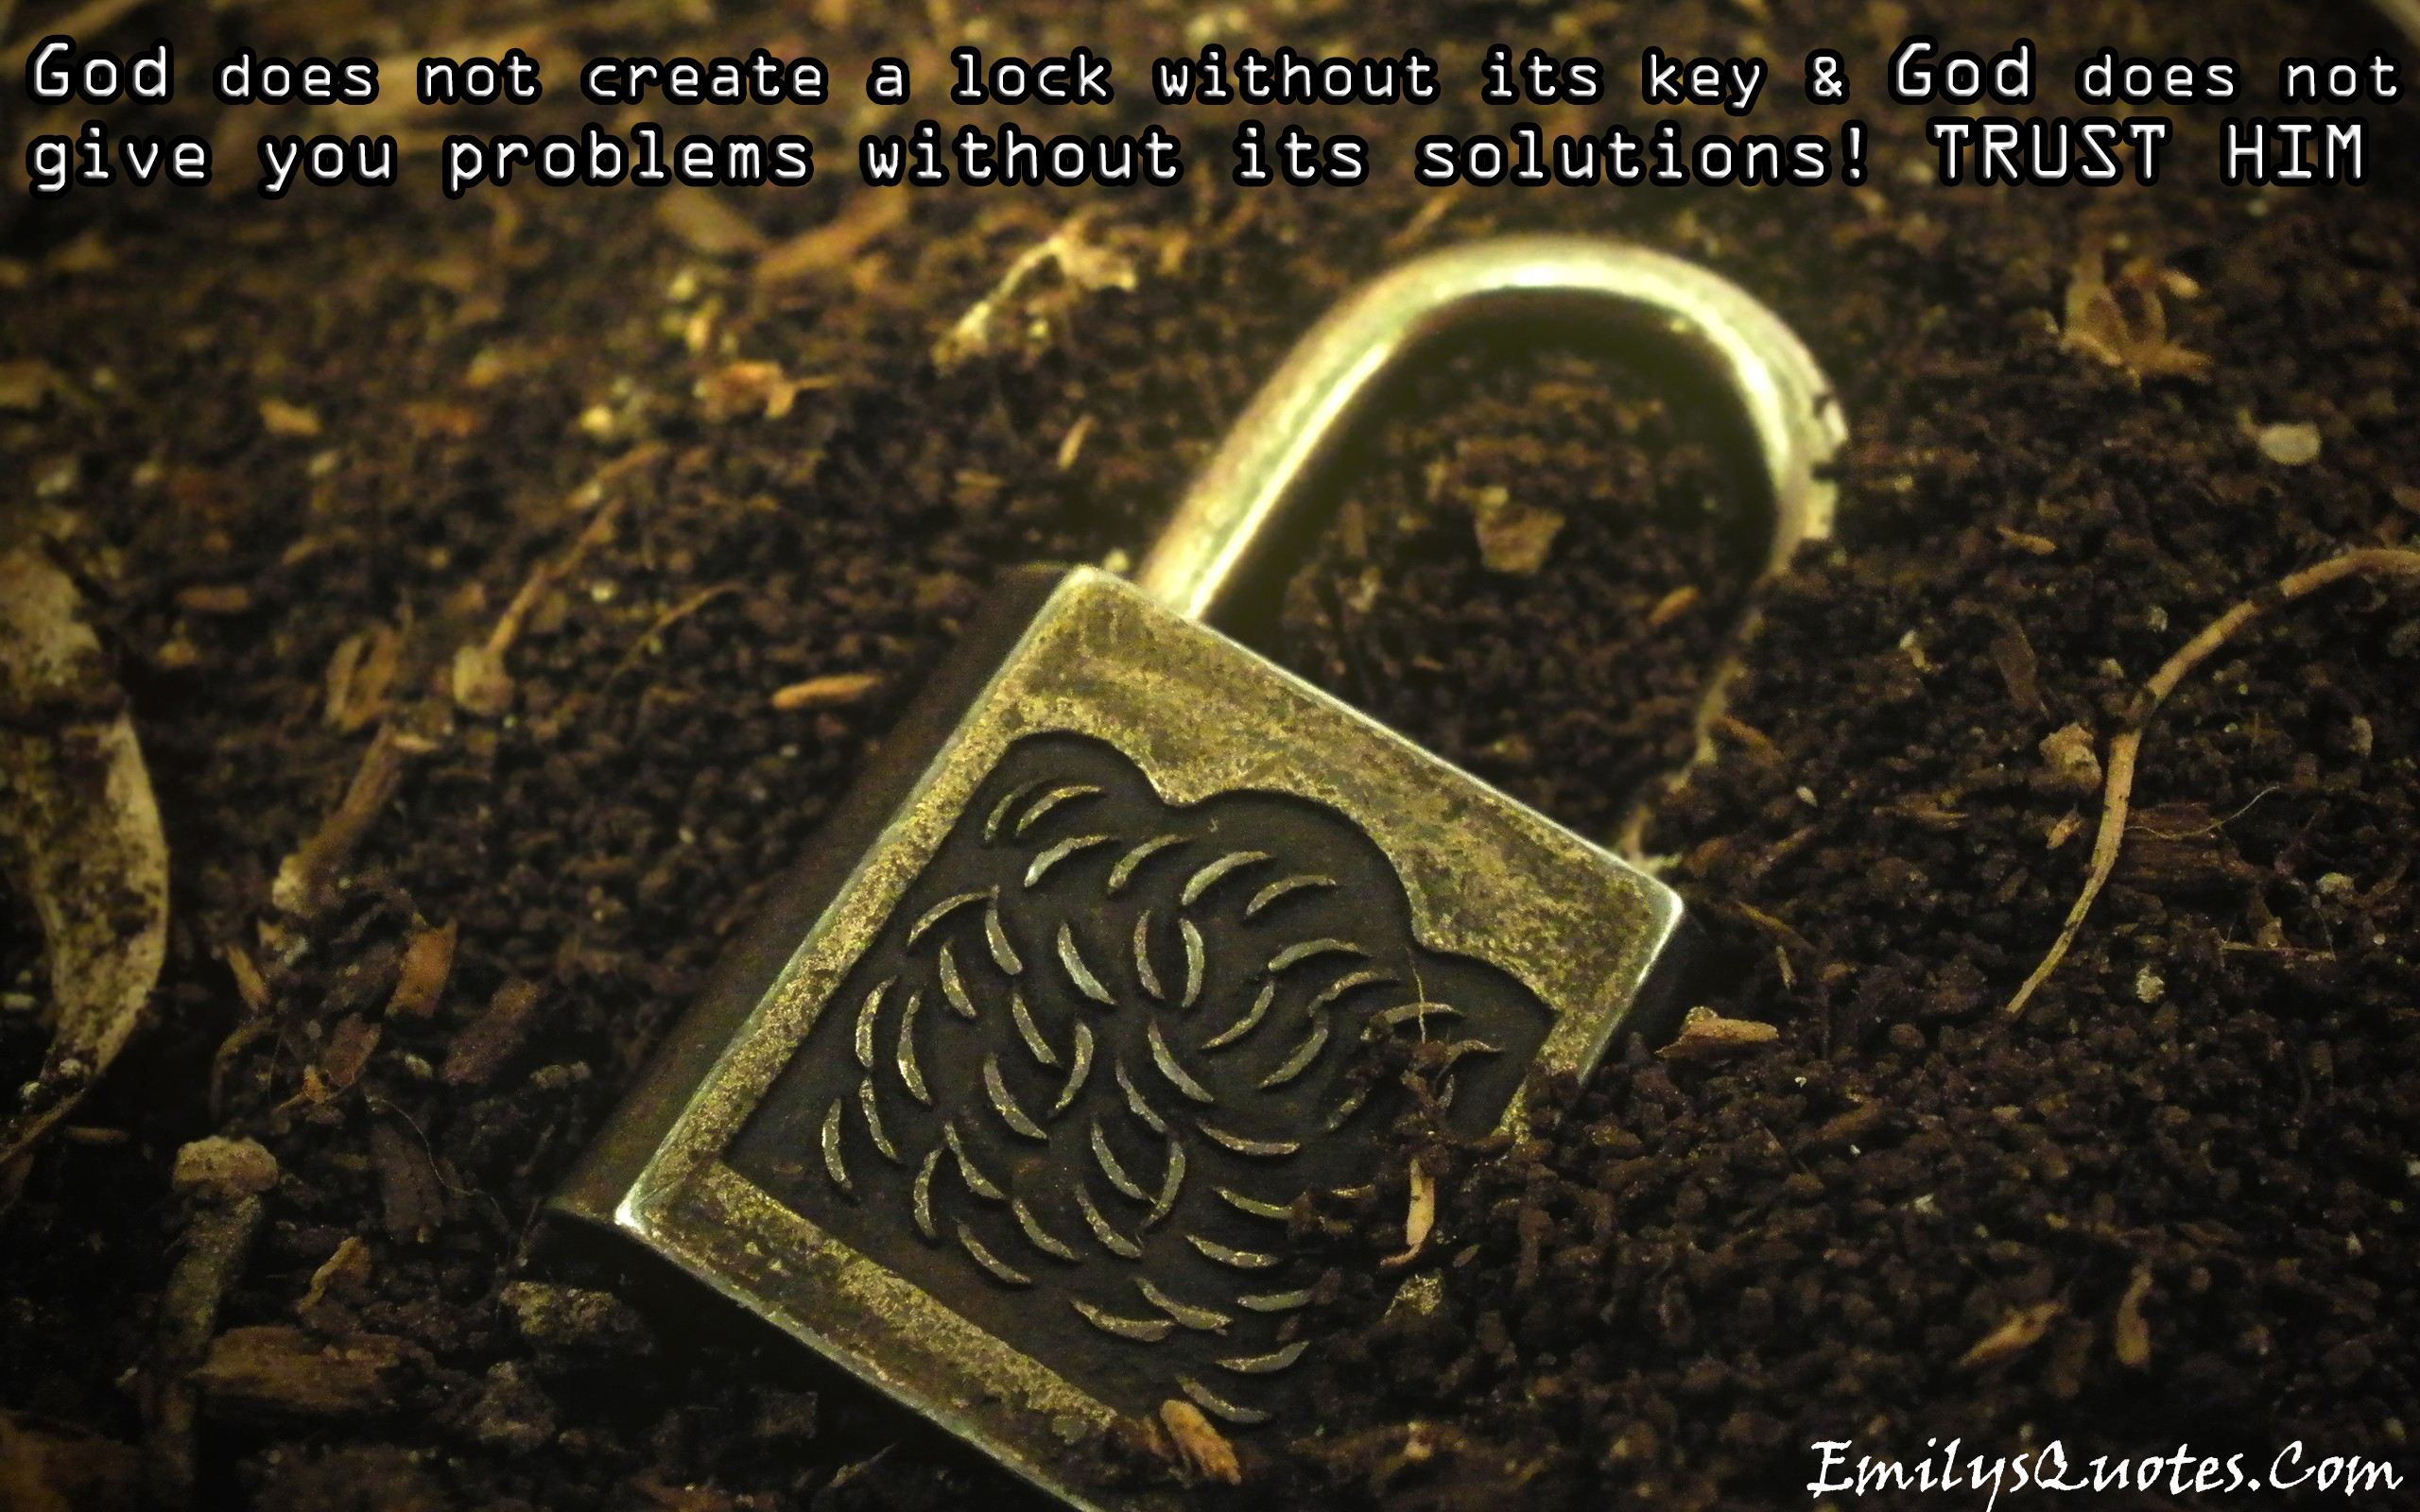 God does not create a lock without its key